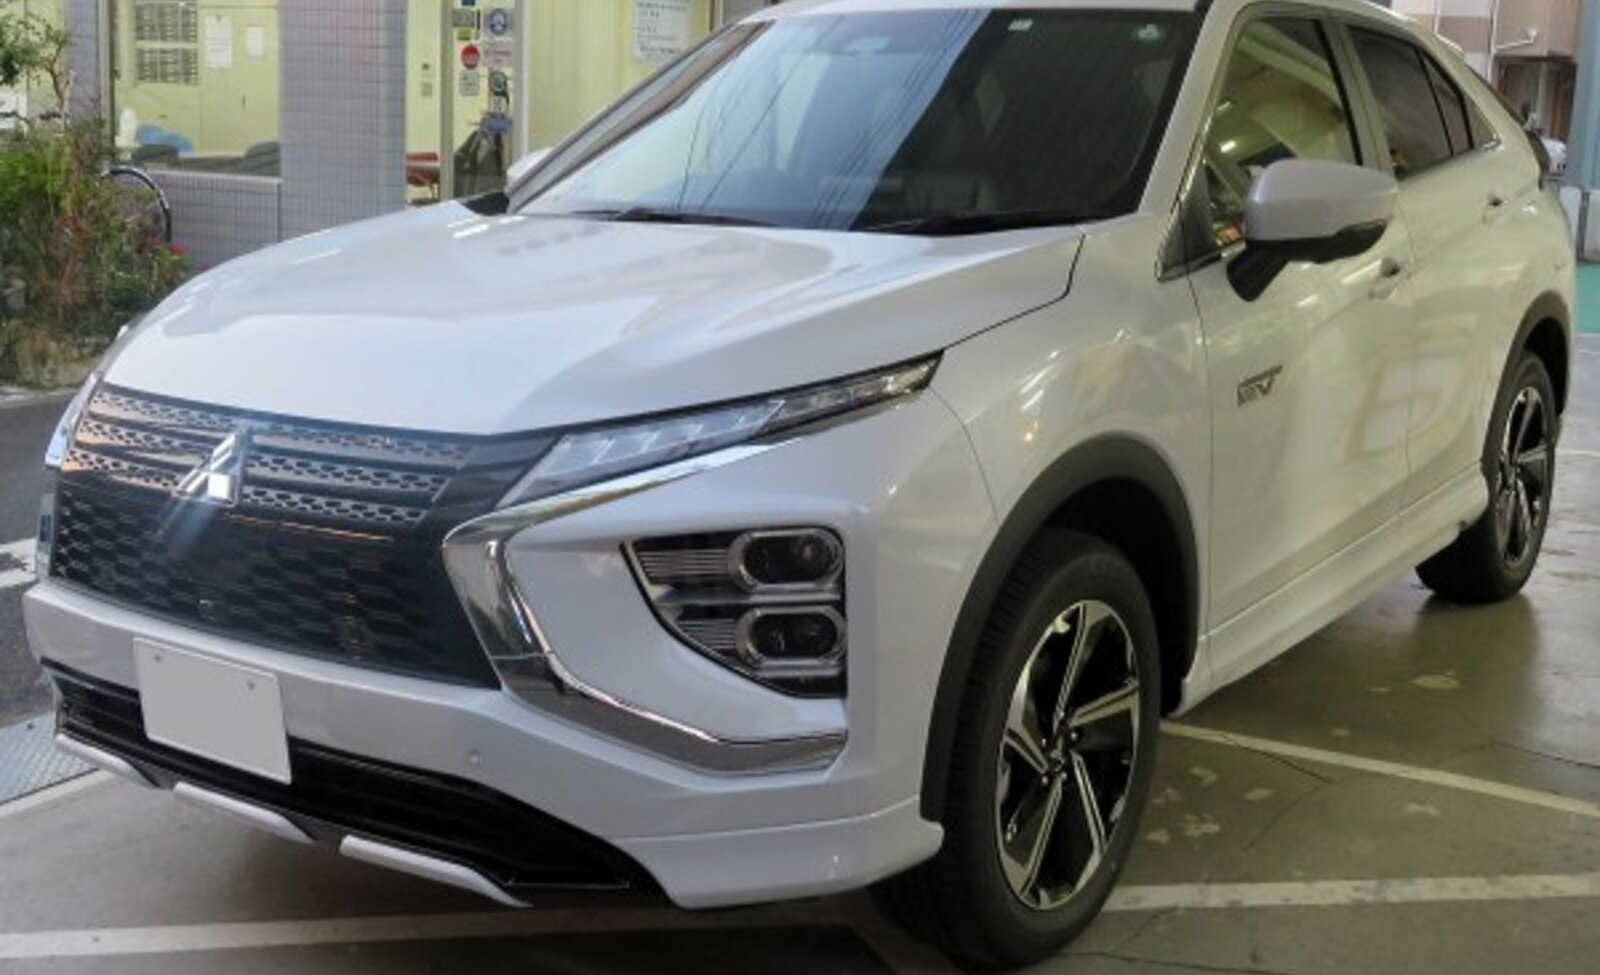 Mitsubishi Eclipse Cross (facelift 2021) 2.4 MIVEC (188 Hp) Plug-in Hybrid S-AWC 2021, 2022 